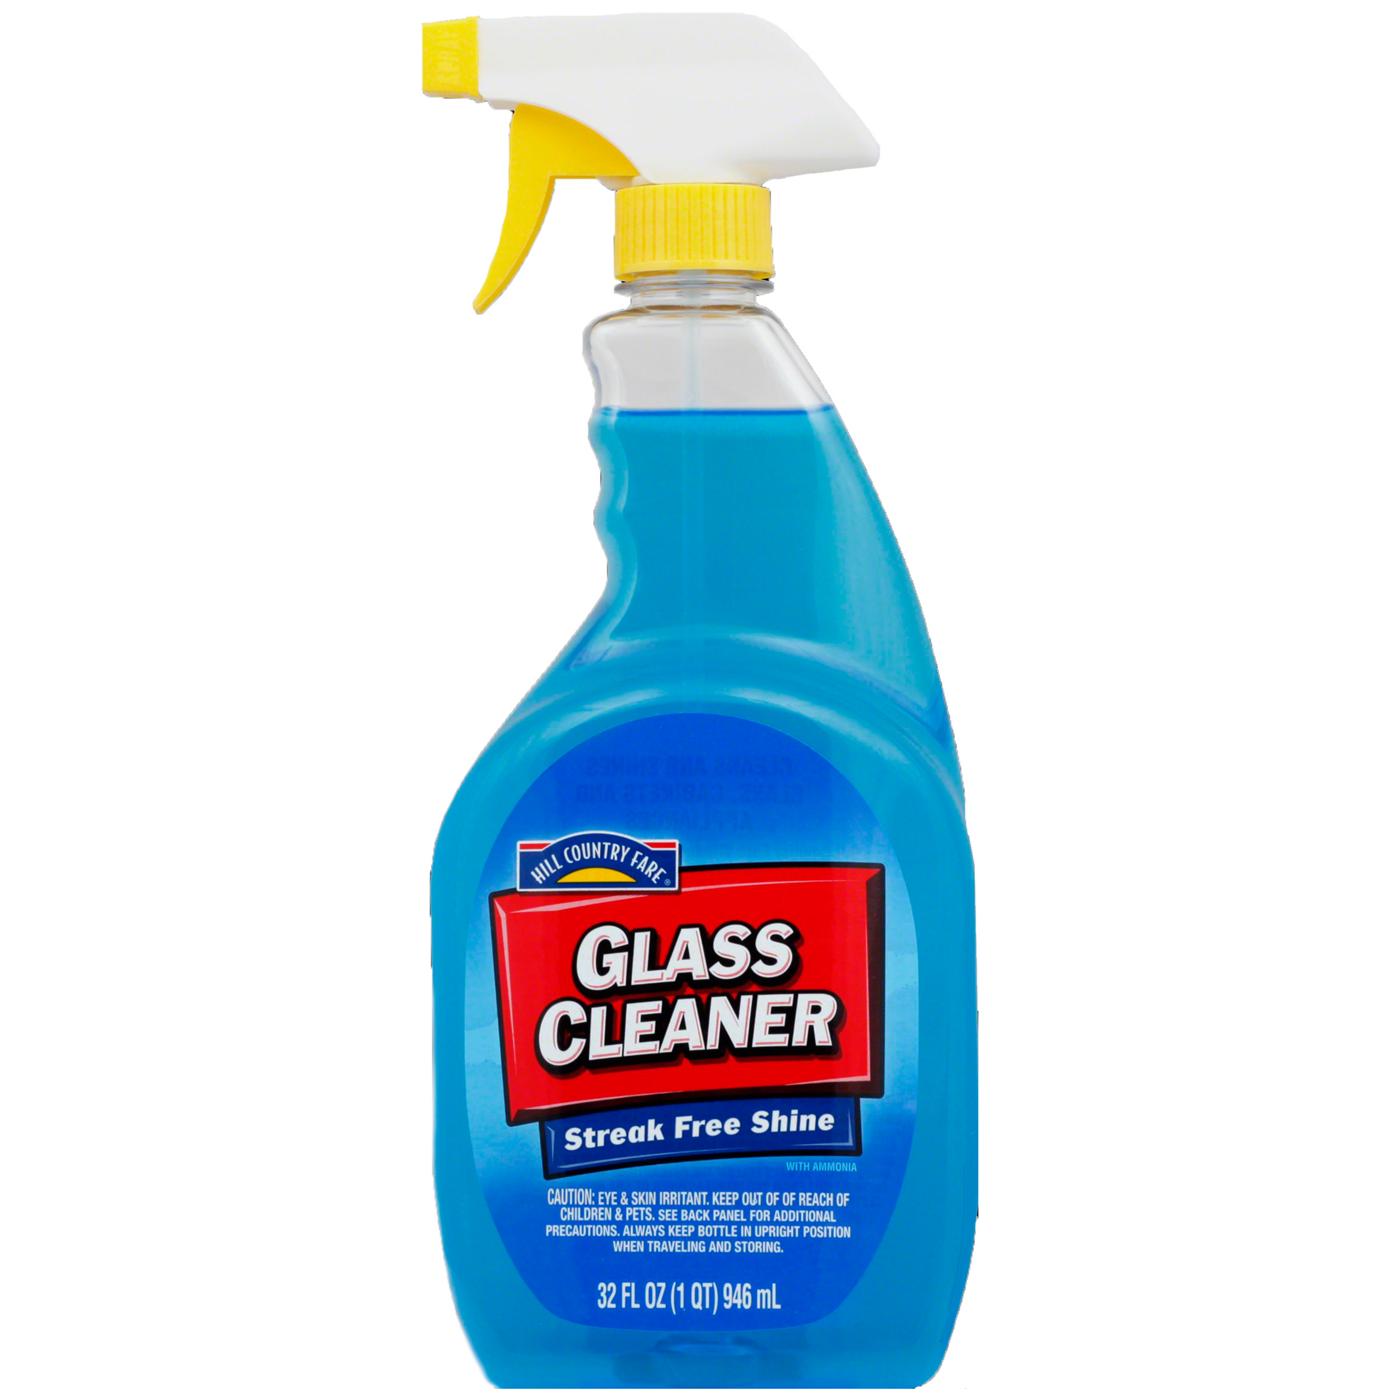 Hill Country Fare Glass Cleaner with Ammonia Spray - Shop All Purpose  Cleaners at H-E-B